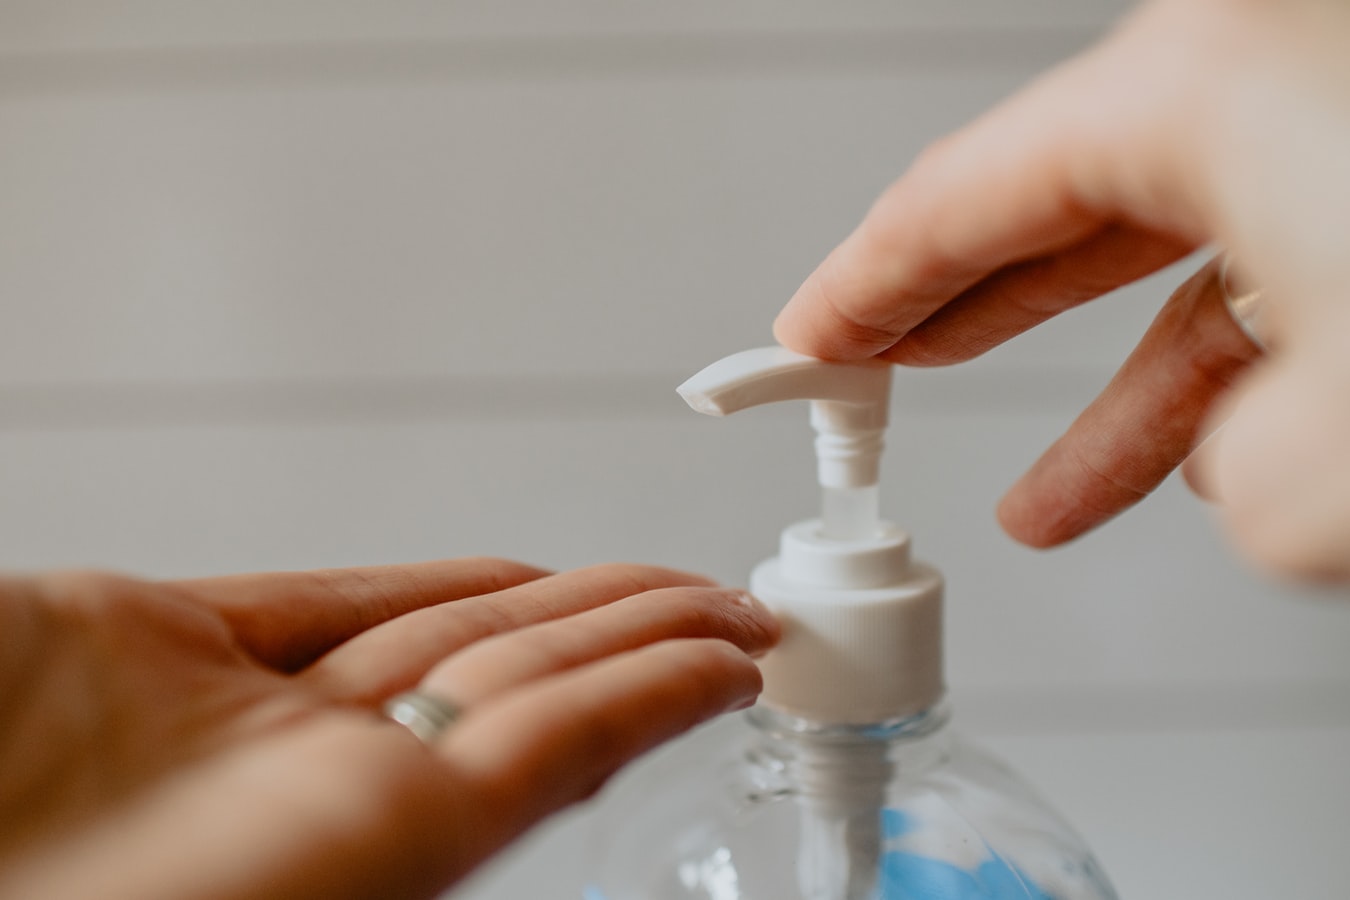 hand sanitizer being squeezed into someone elses hand